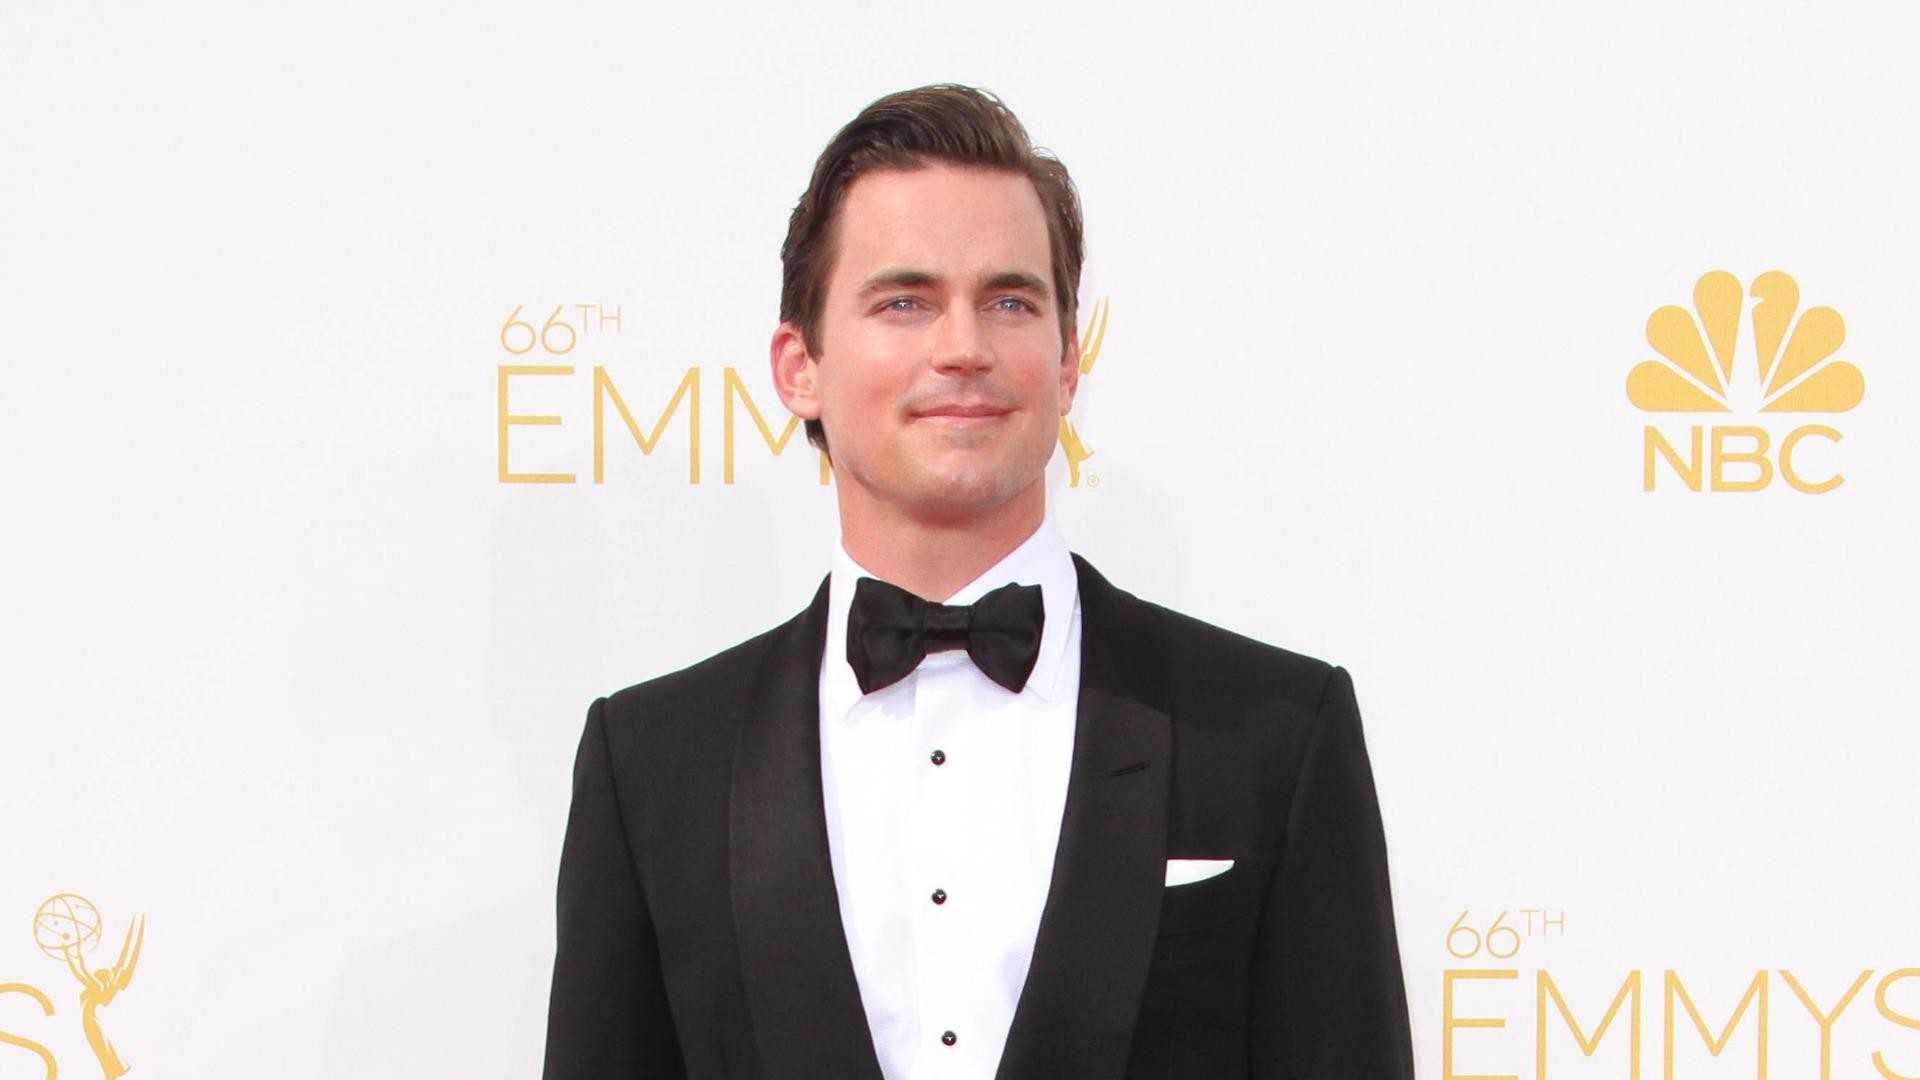 1920x1080 There is one thing strippers can't have and it's all Matt Bomer can think